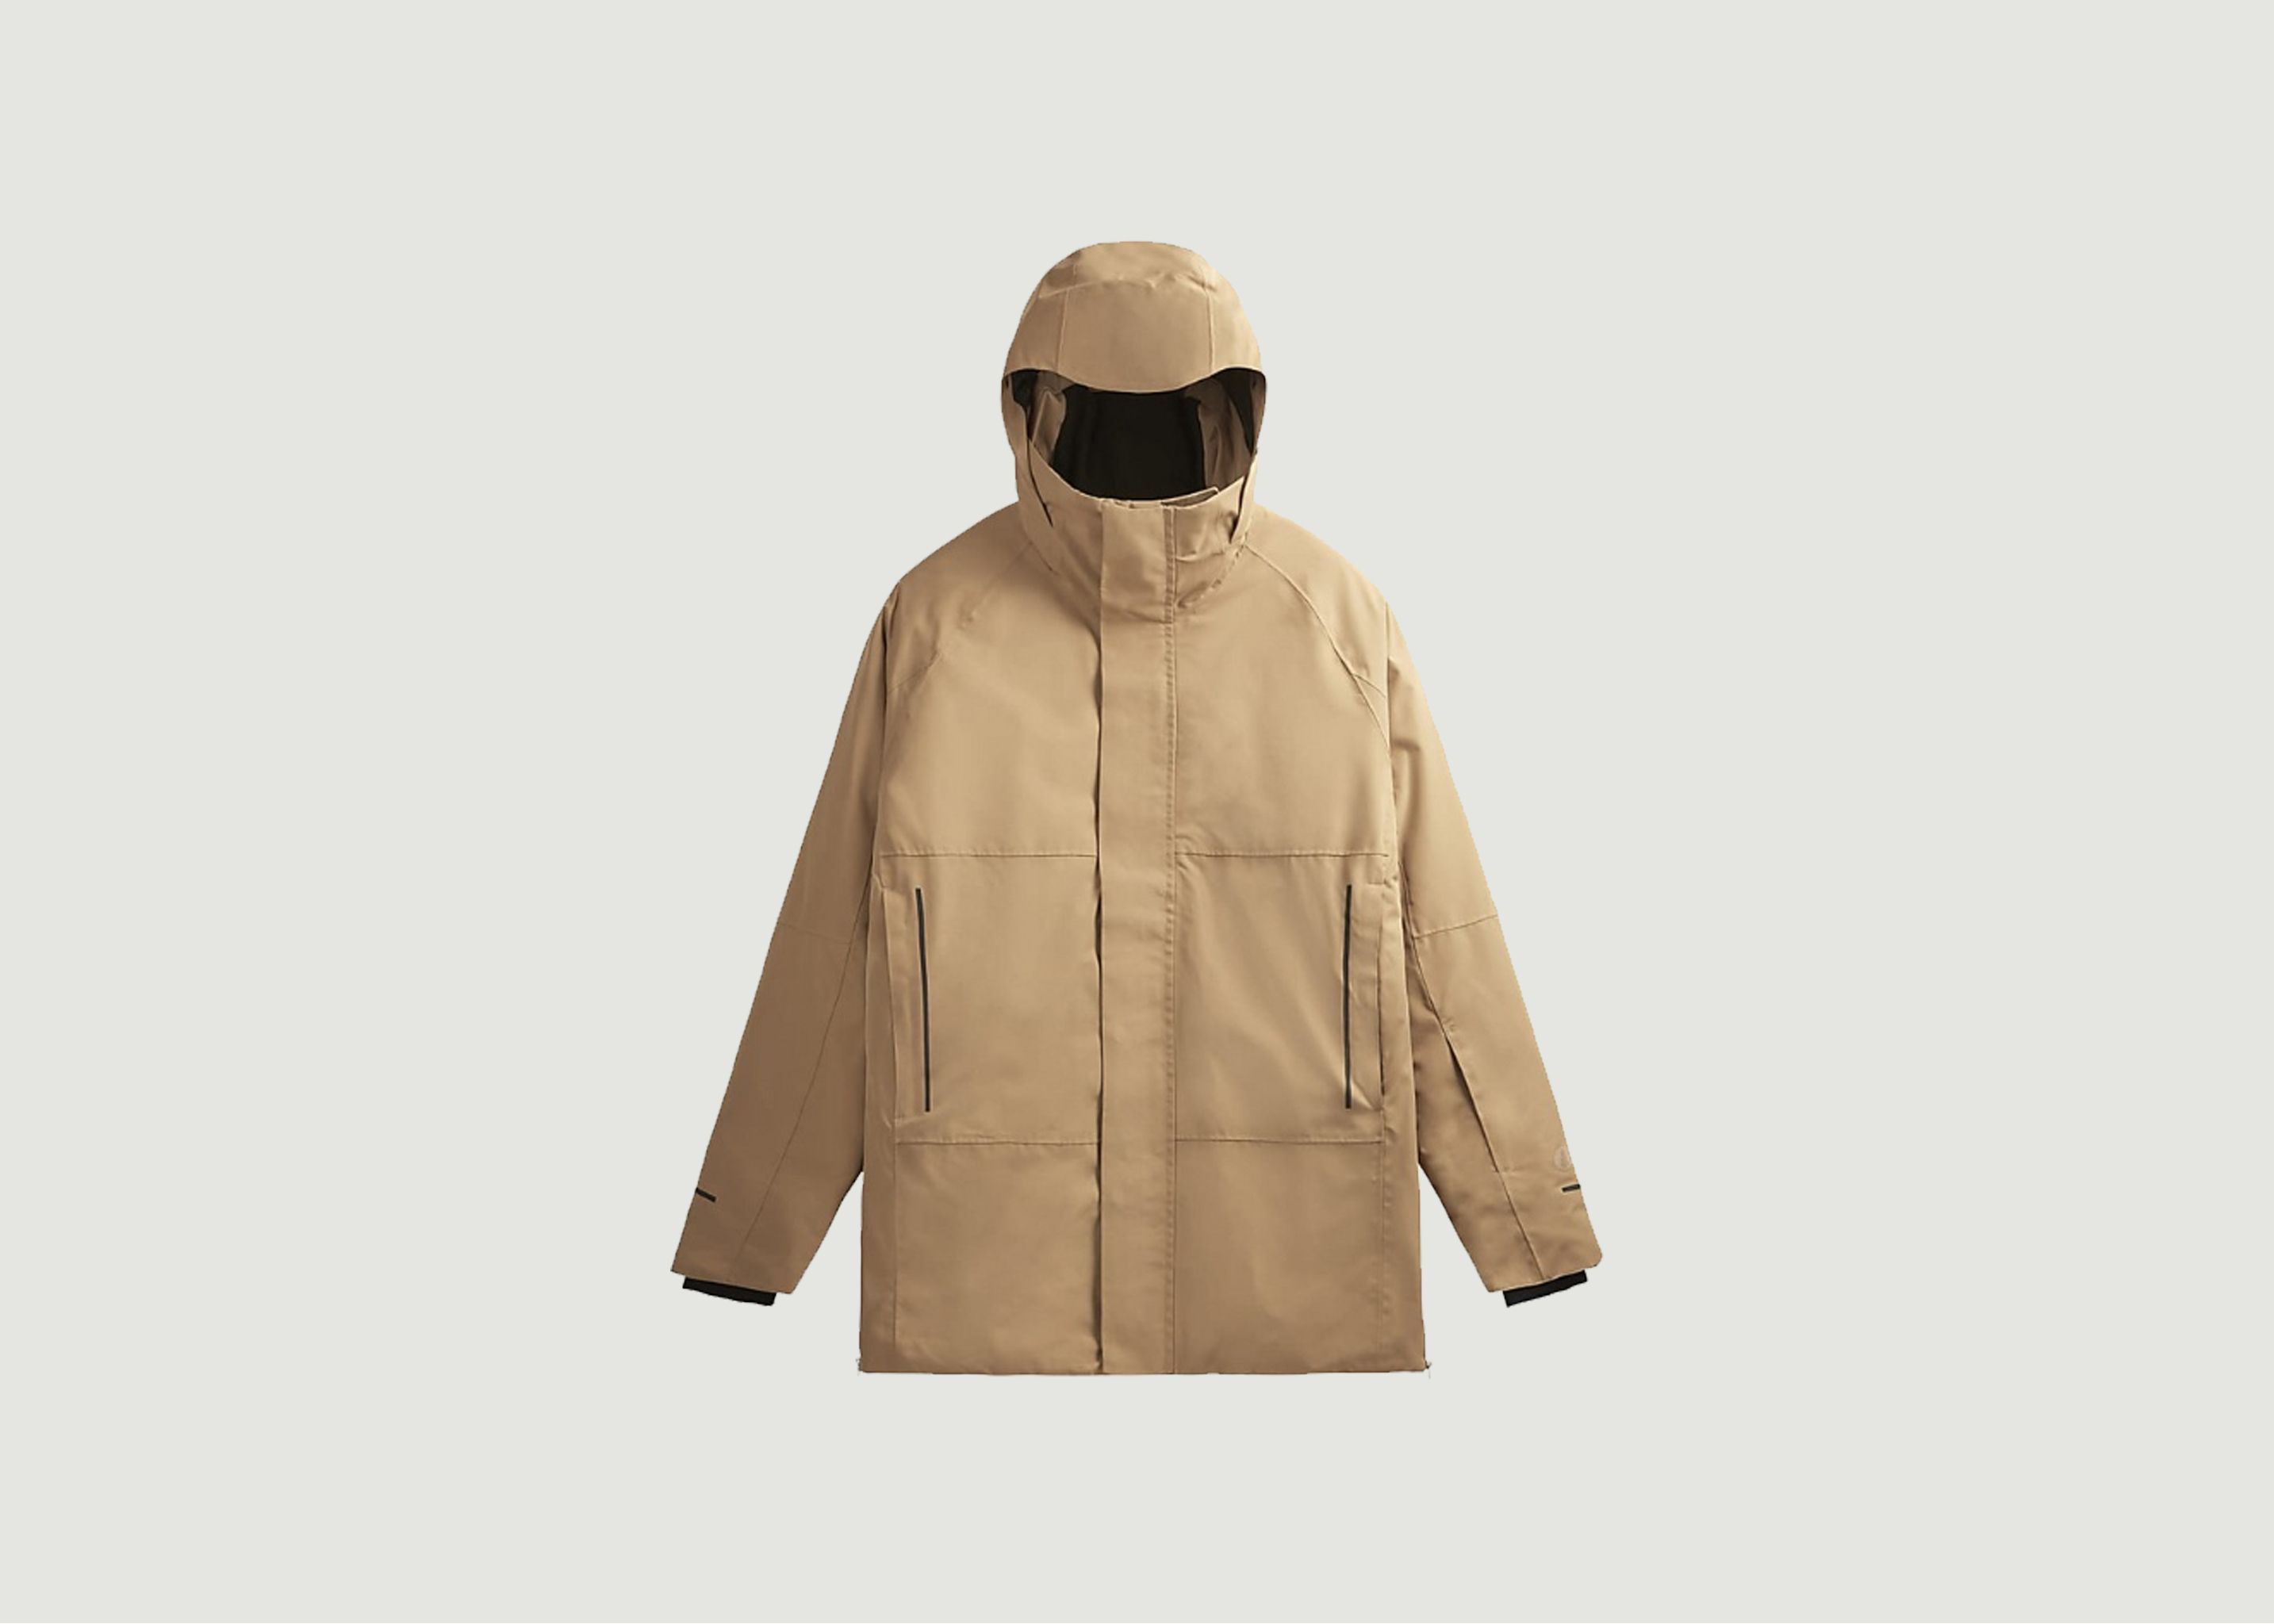 Dailytime JKT Jacket  - Picture Organic